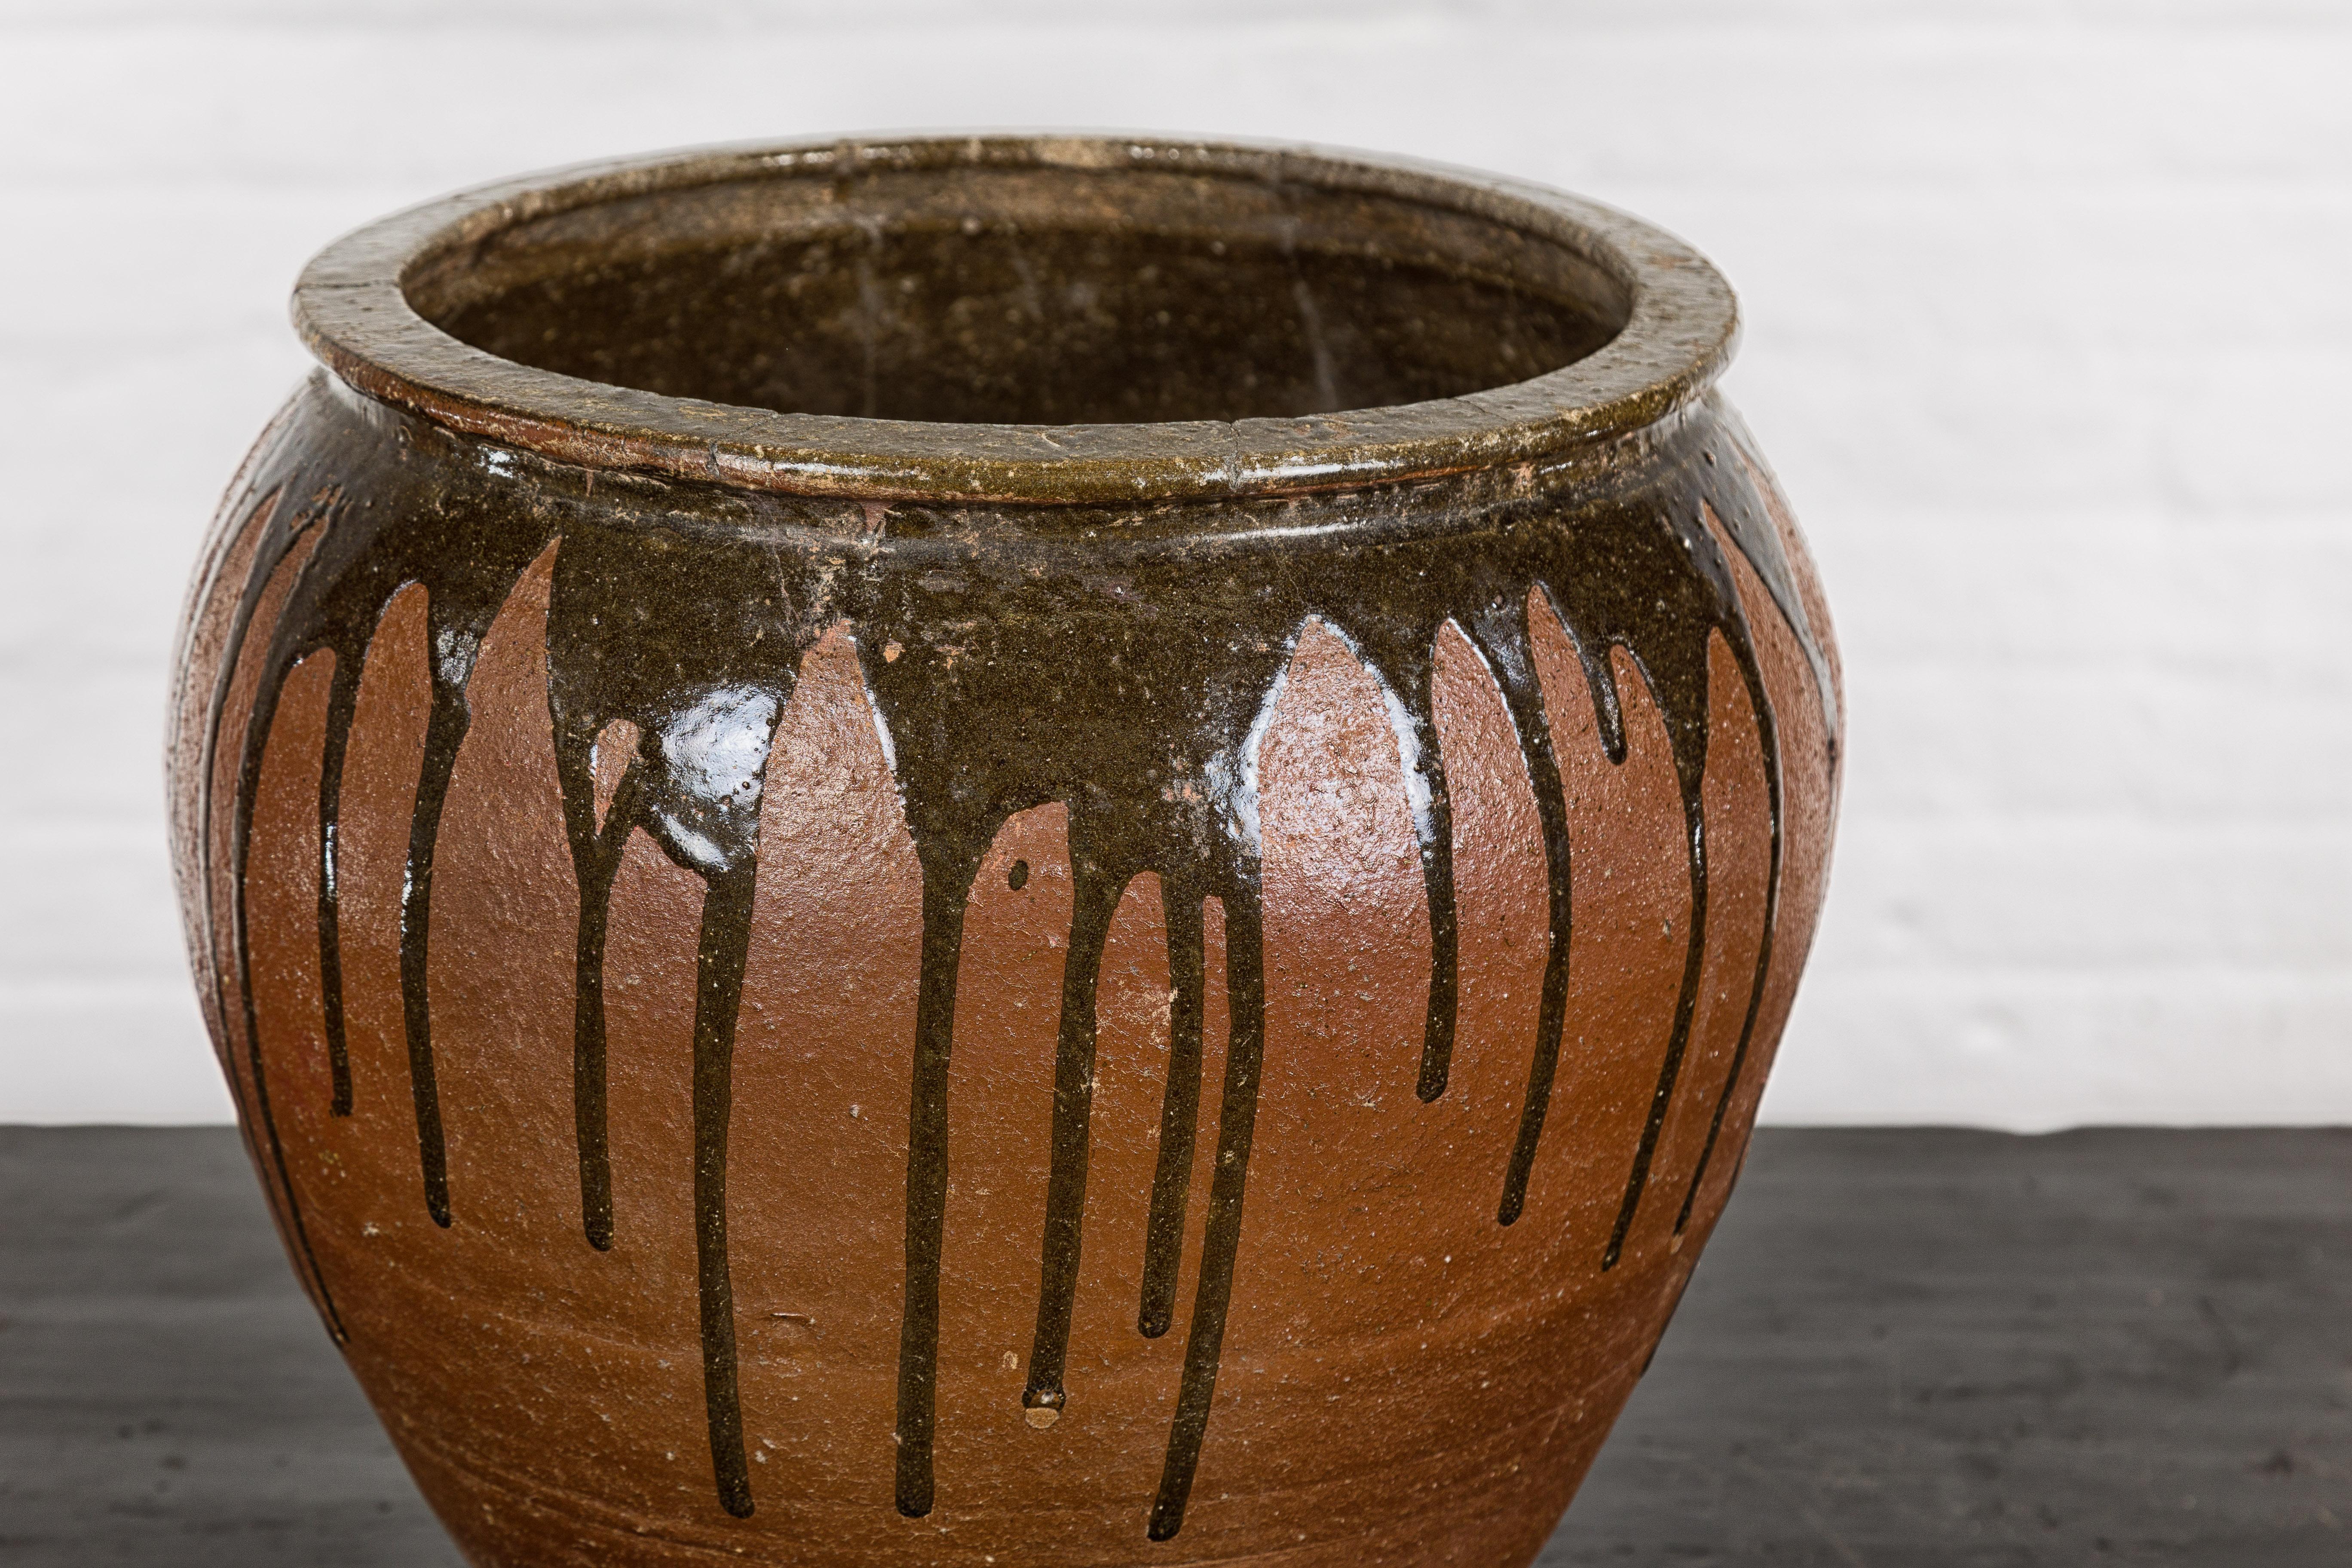 20th Century Japanese Tamba Ware Brown Glazed Ceramic Salt Pot Planter with Dripping For Sale